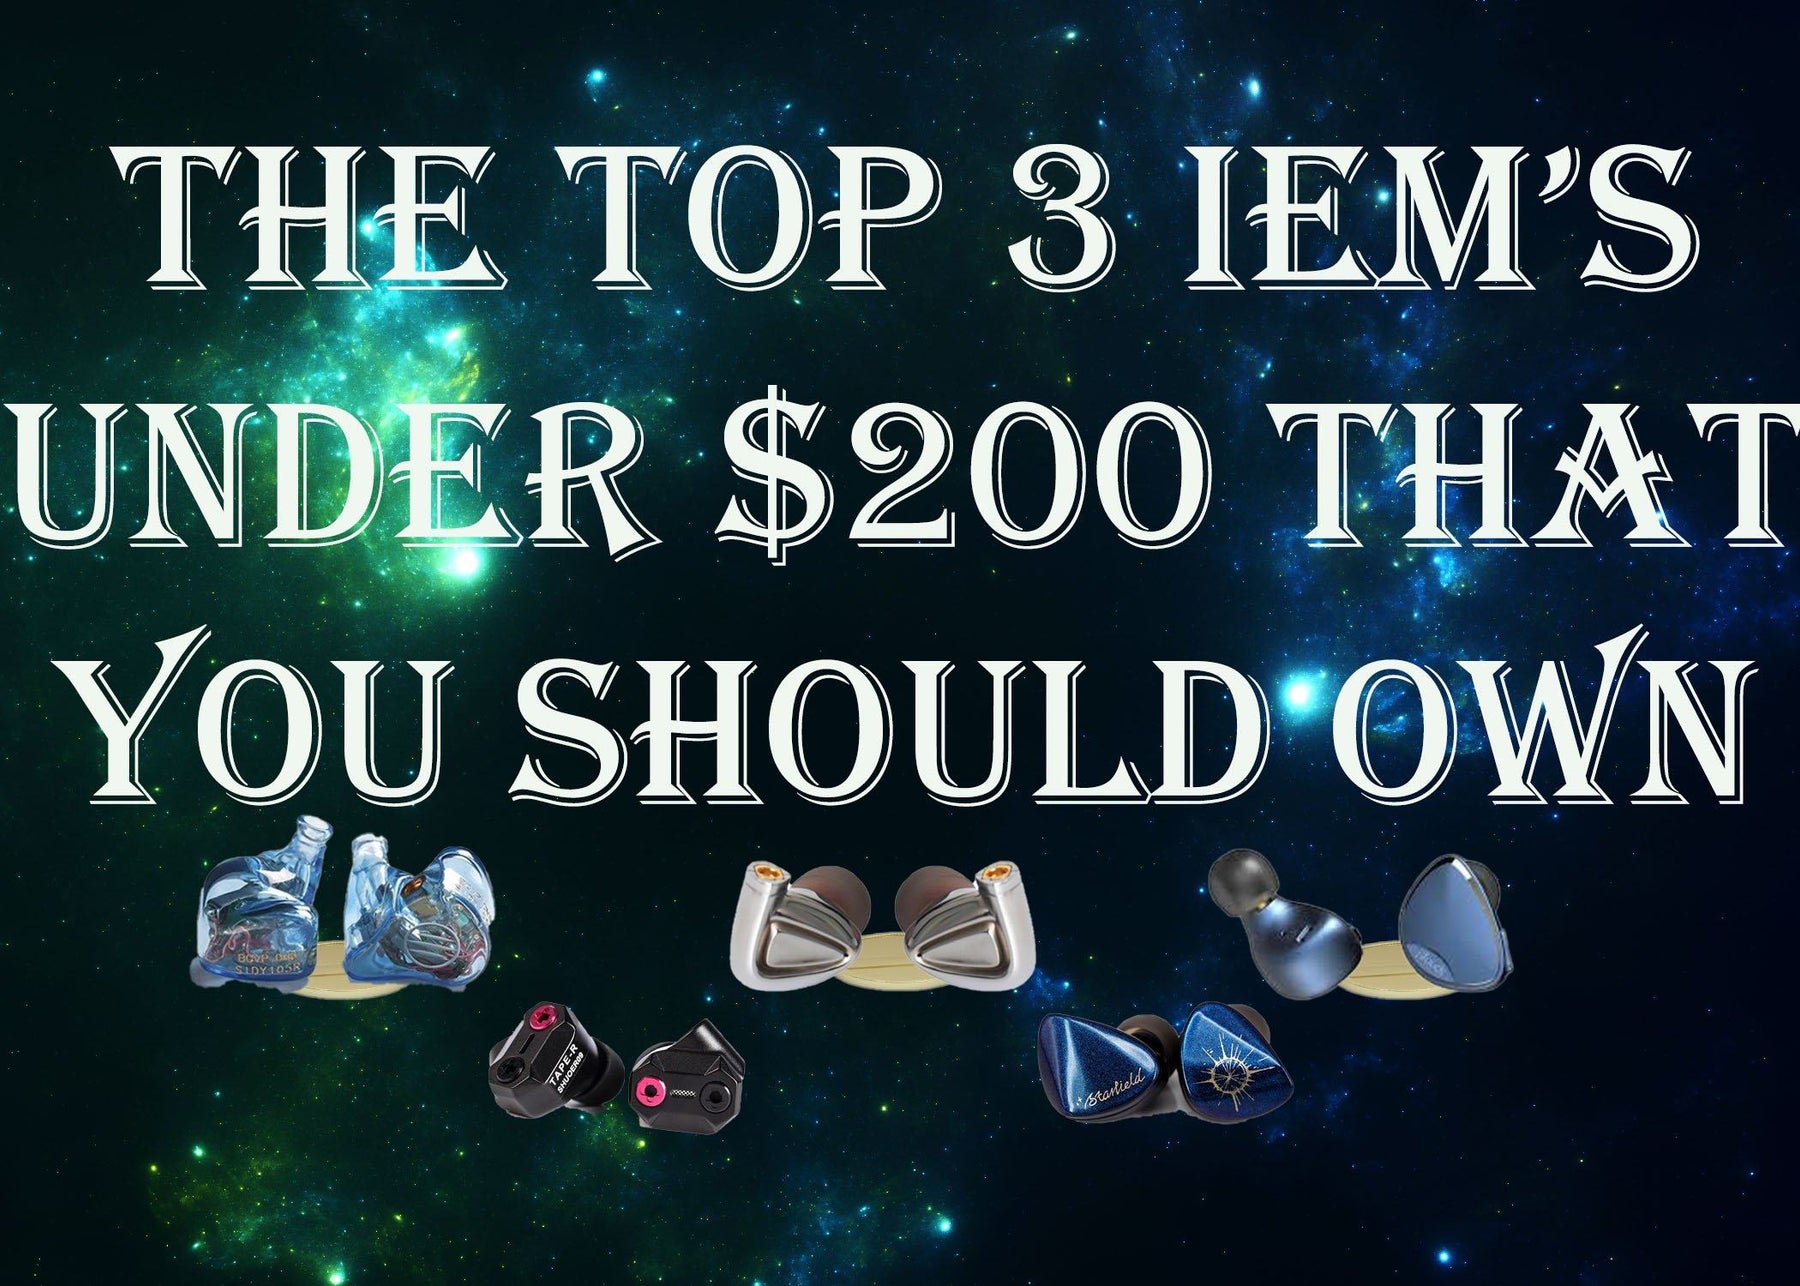 The top 3 IEM's under $200 that everyone should own.